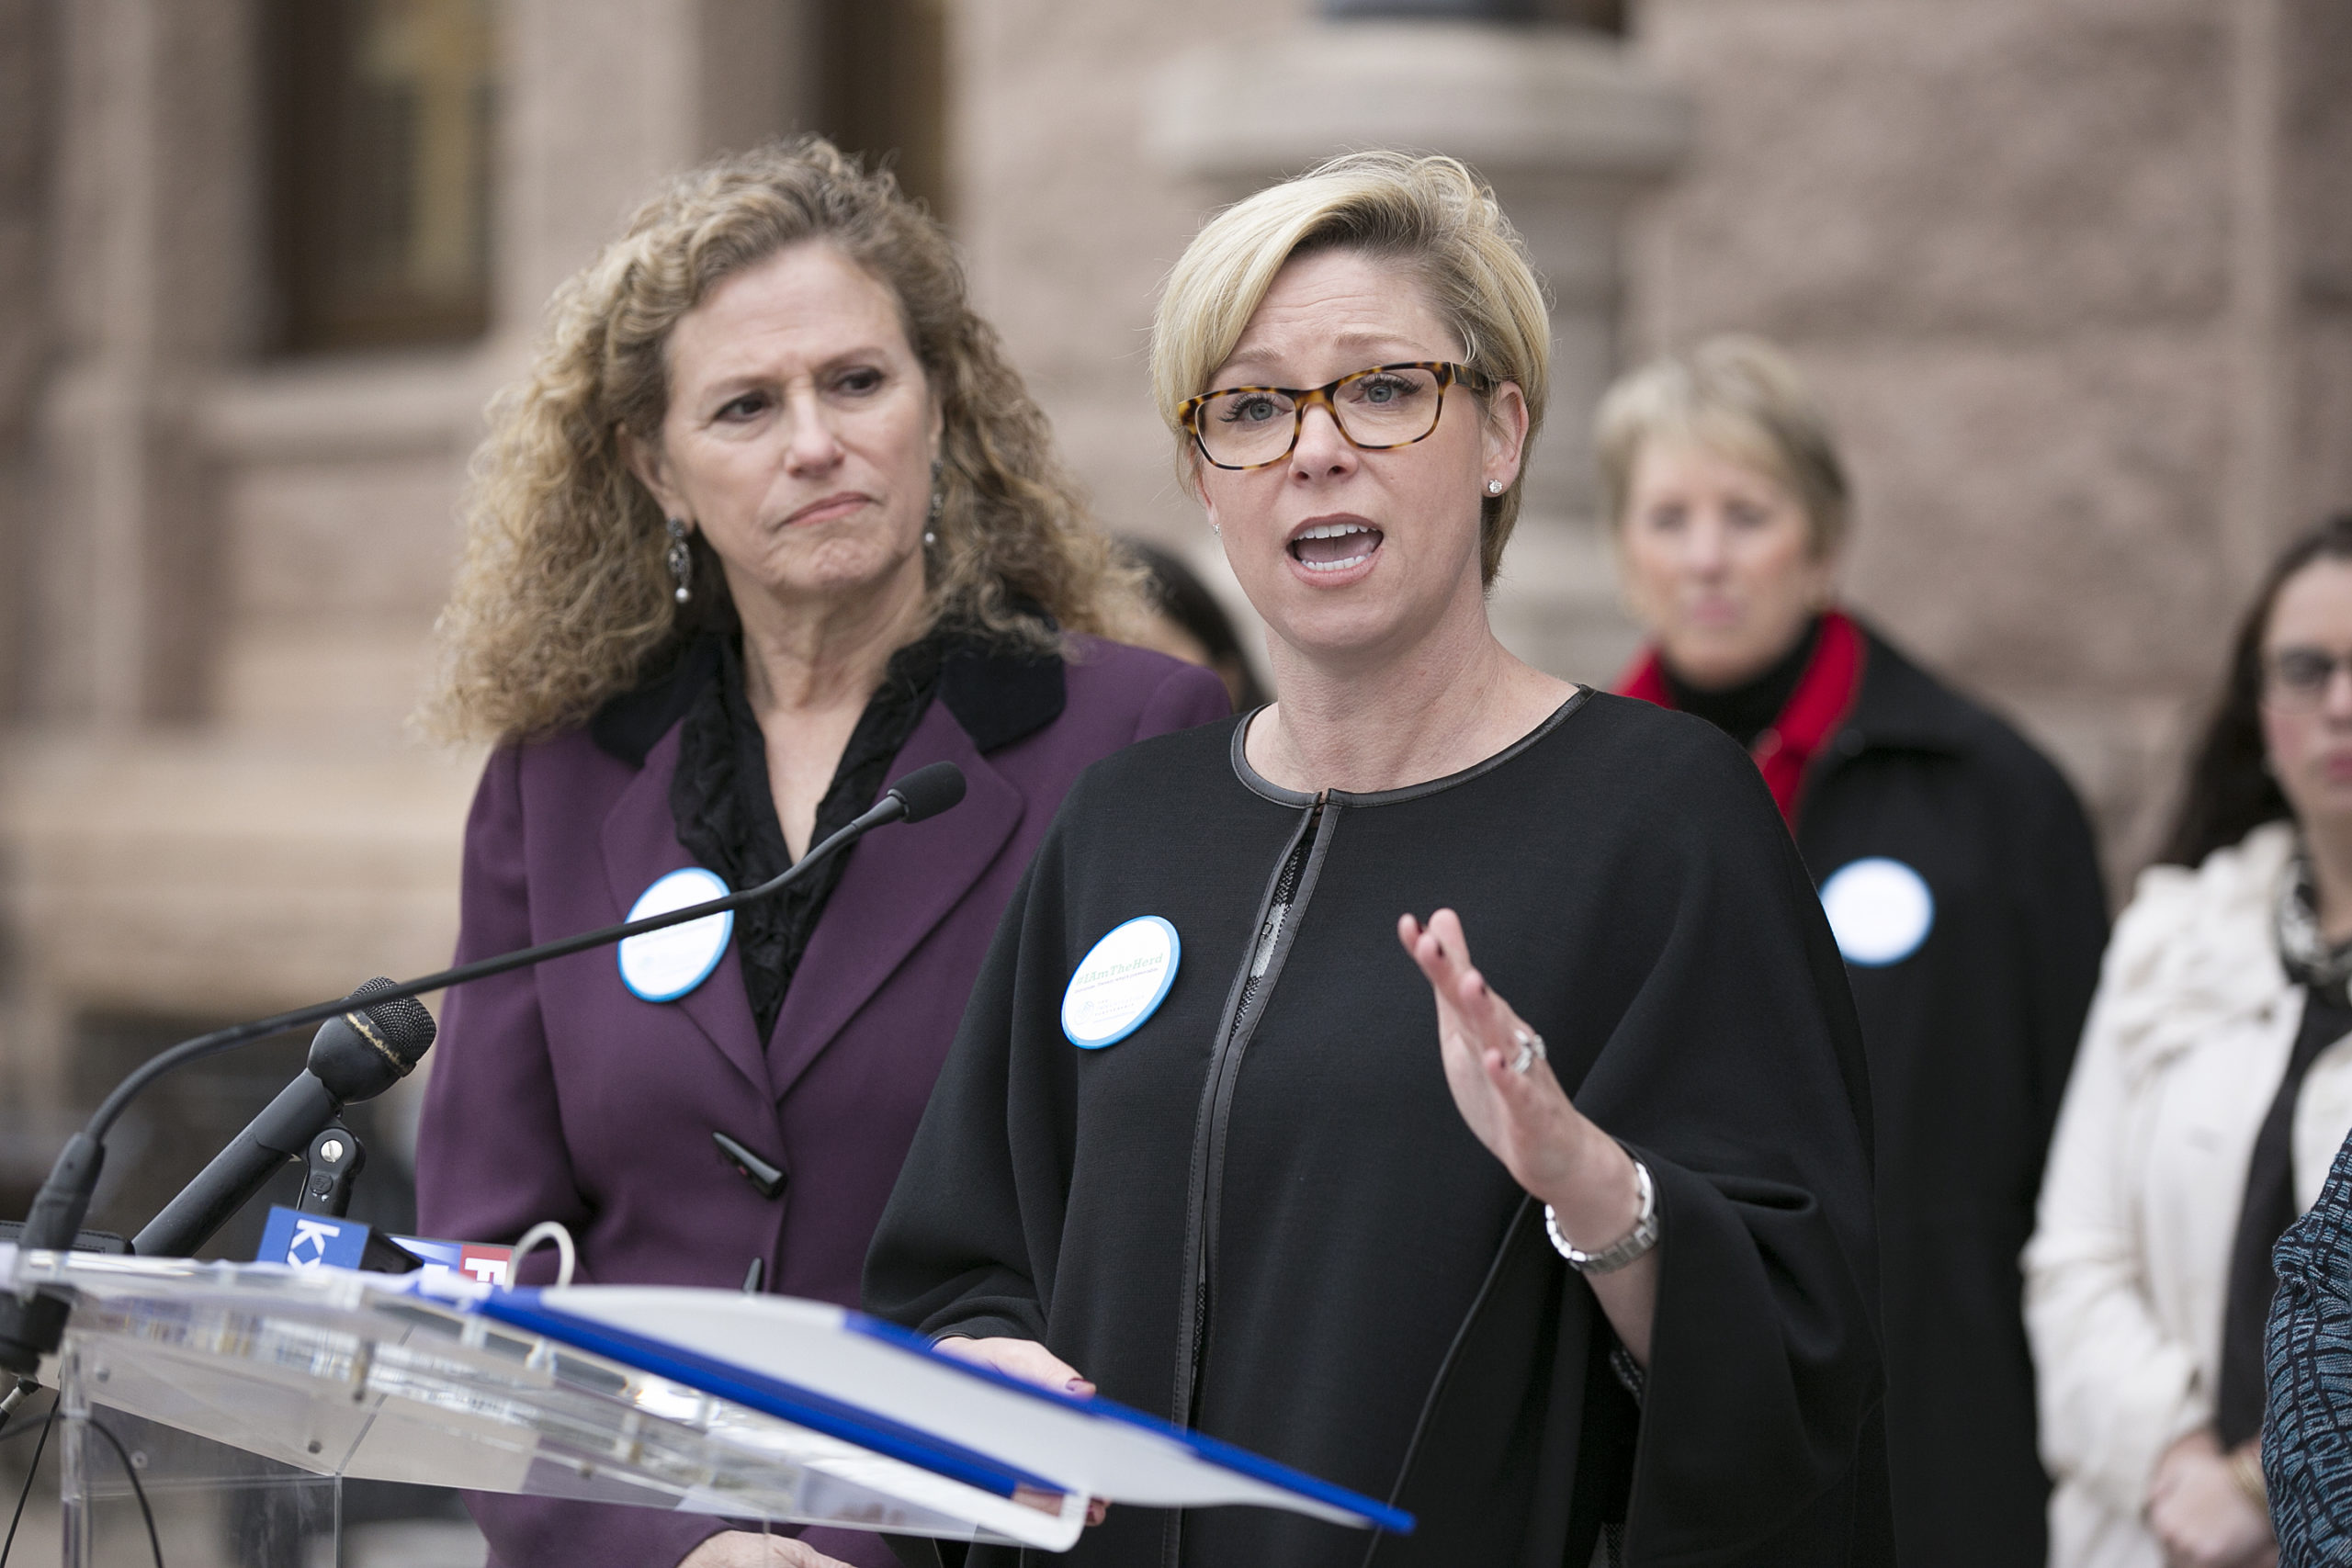 State Rep. Sarah Davis speaks about the vaccination and cancer issues in regards to the HPV vaccine in the state during a news conference at the Capitol, Wednesday, Dec. 7, 2016, in Austin, Texas. Texas could host the nation's next major fight over stricter requirements for immunizations as its rates of schoolchildren who refuse to get shots for non-medical reasons rises. (Deborah Cannon/Austin American-Statesman via AP)